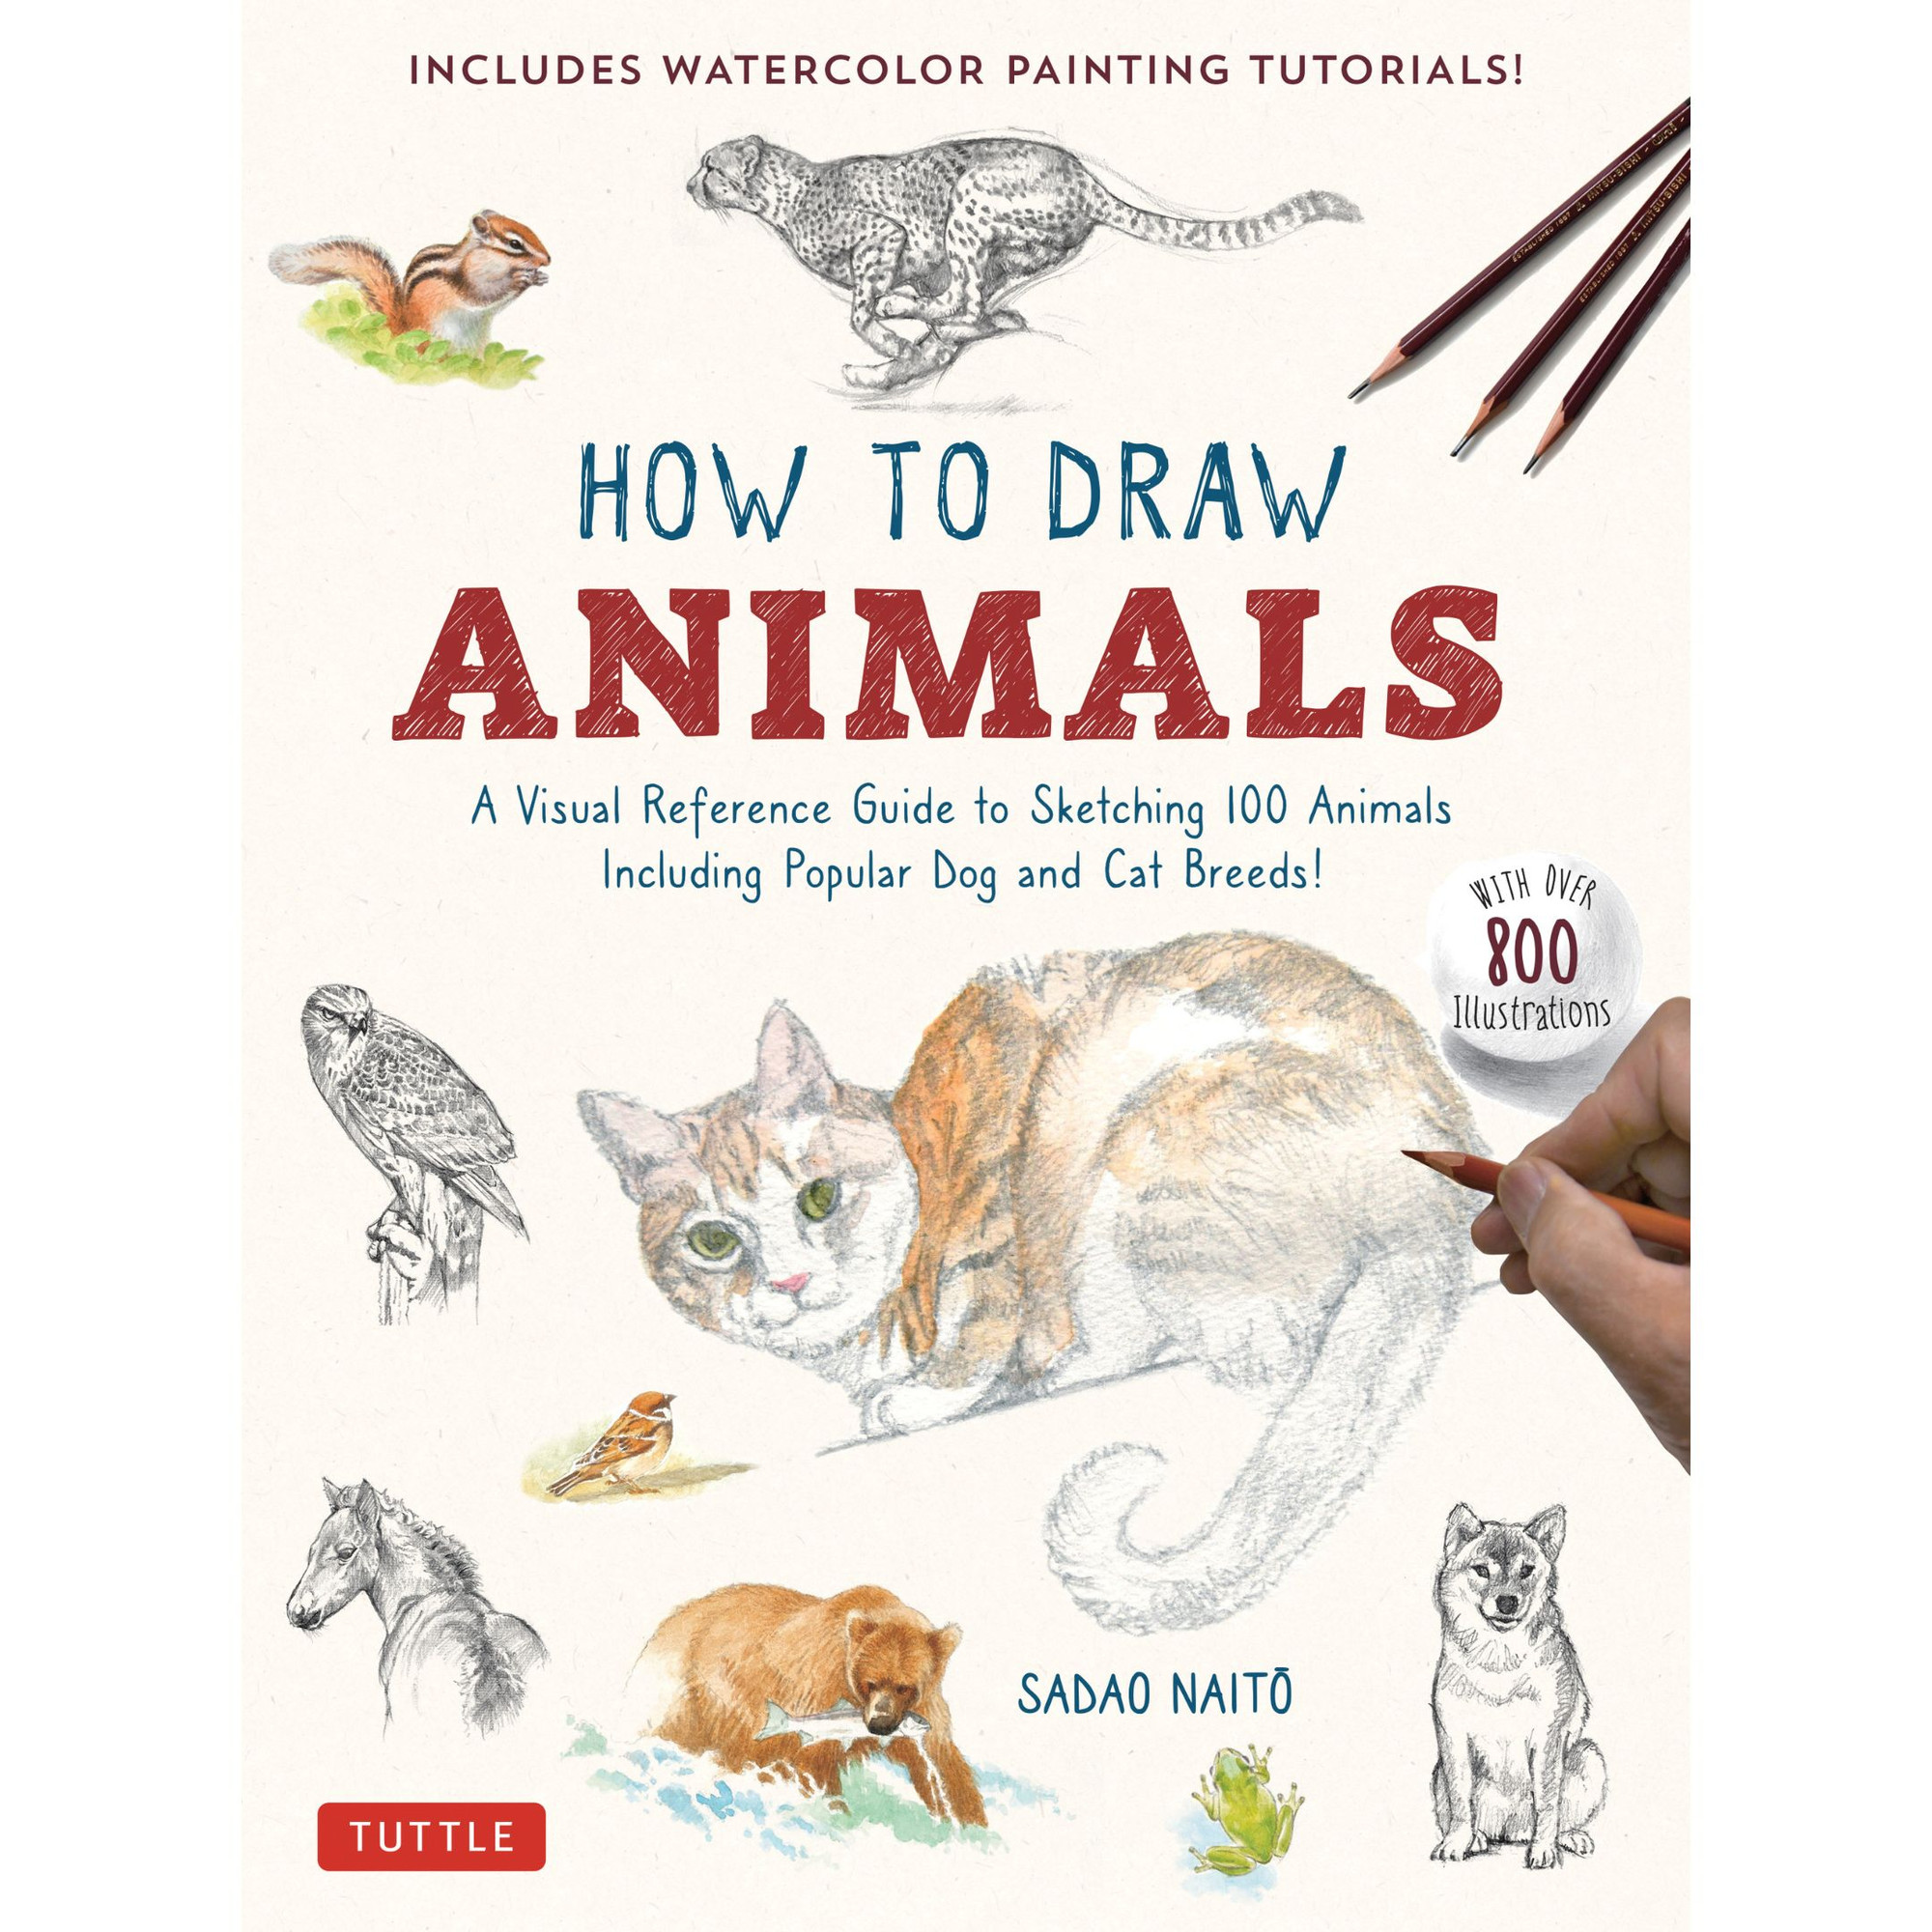 Sorry i am not good at drawing animals 🩷#animals #tutorial #art